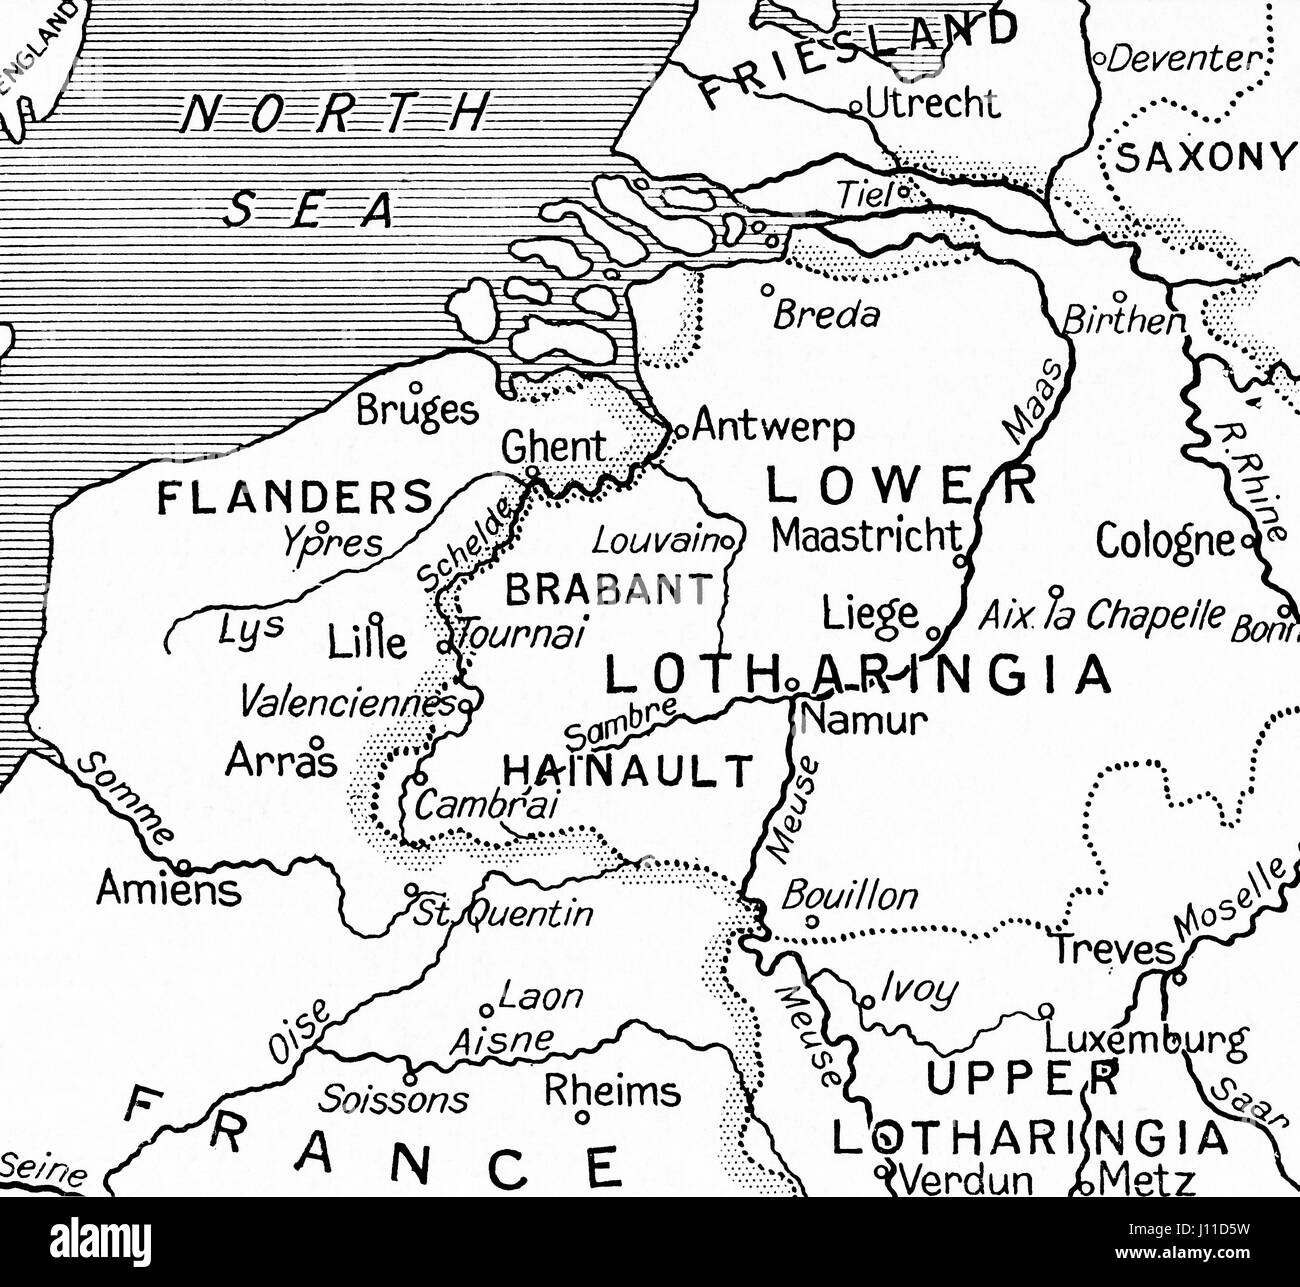 Map of Belgium, which from 843 to 869 formed part of the domains of the Duke of Lotharingia or Lorraine.  From Hutchinson's History of the Nations, published 1915 Stock Photo